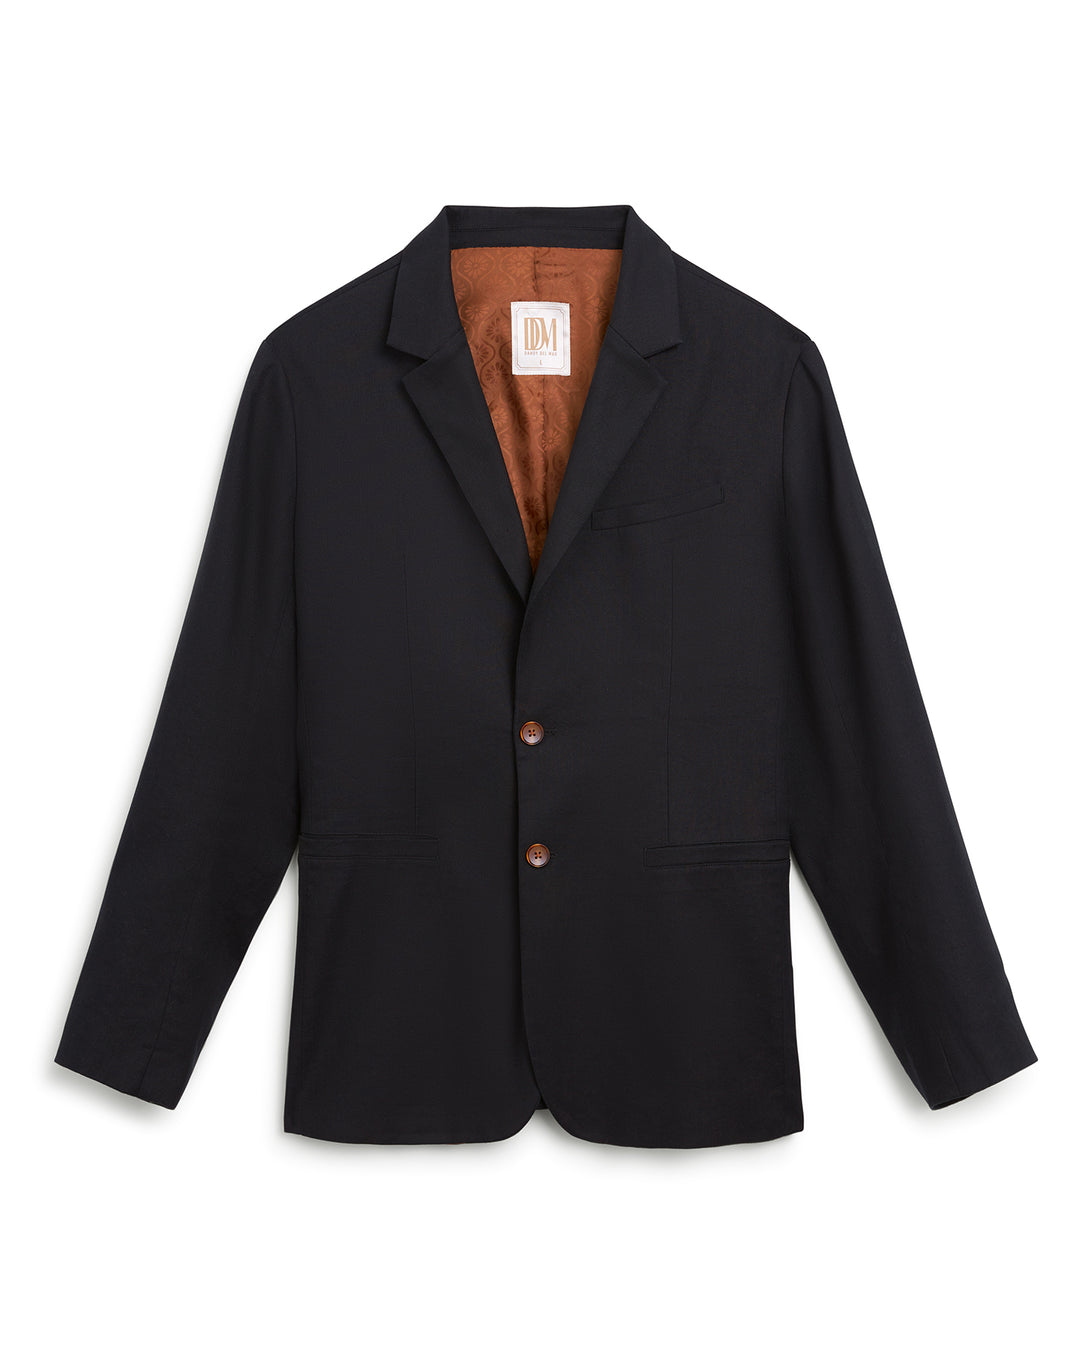 A Dandy Del Mar Brisa Linen Blazer - Onyx with fine linens and brown buttons perfect for night flirtations.